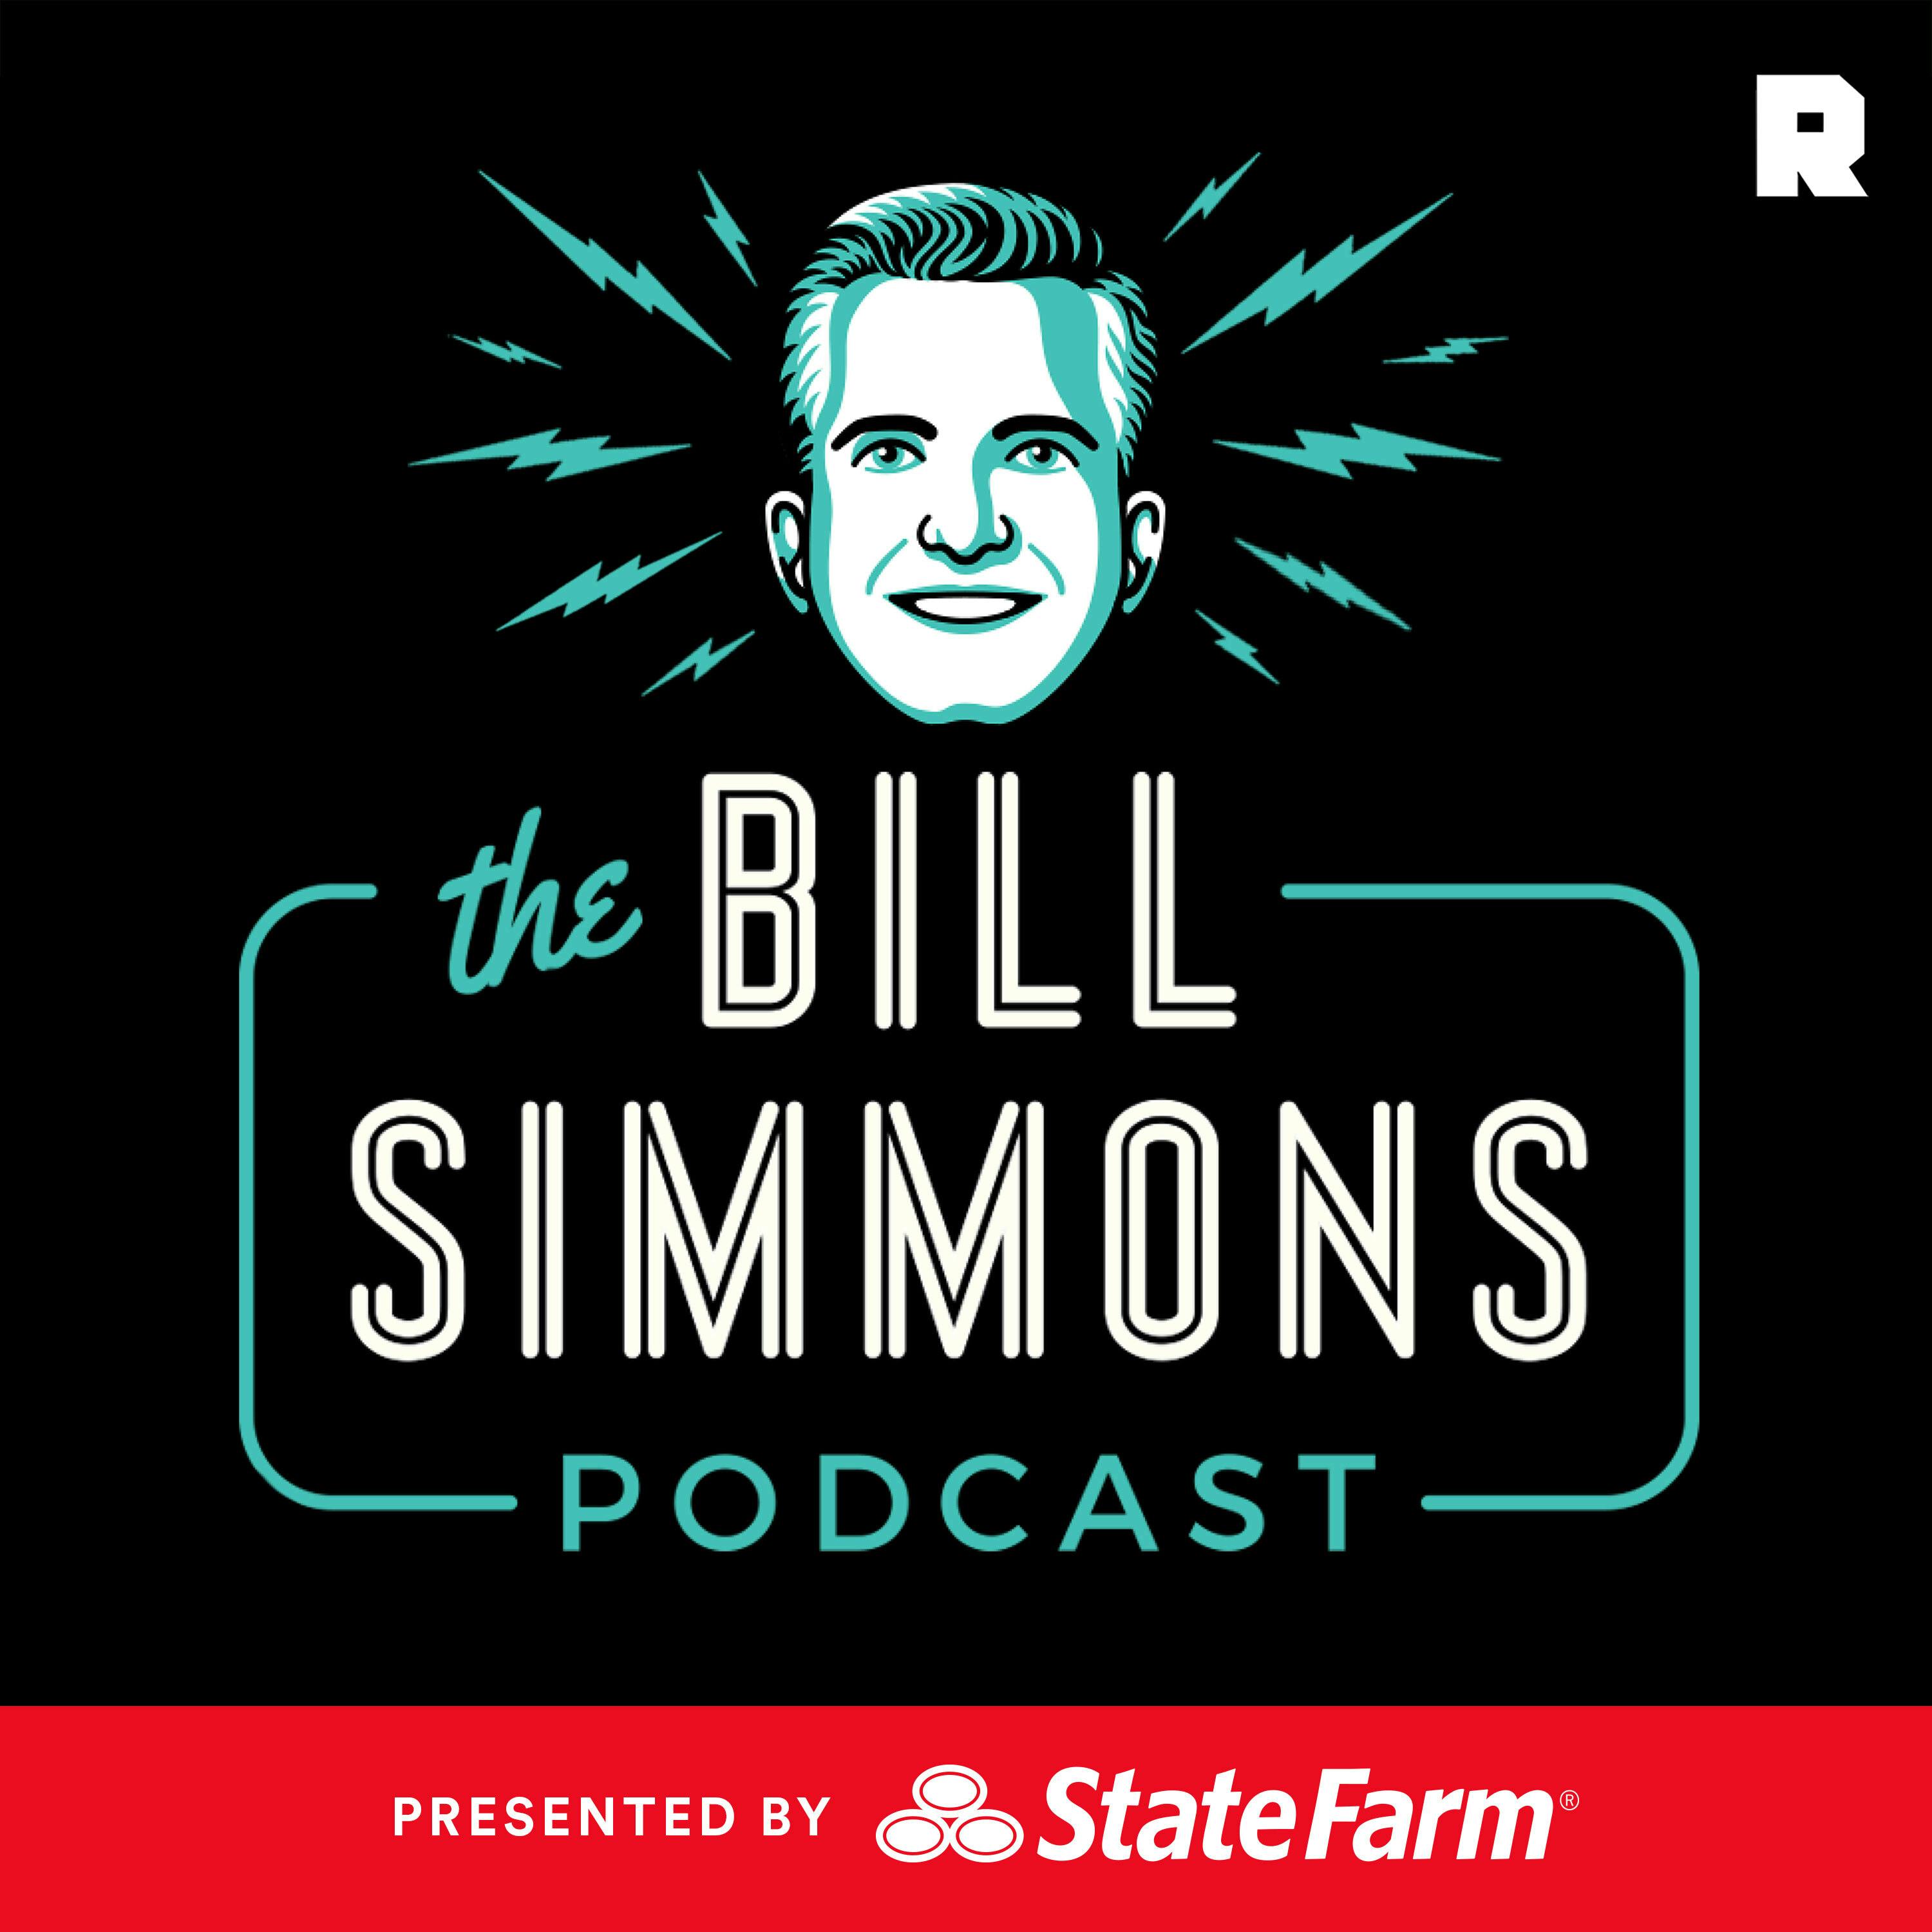 The Bill Simmons Podcast podcast show image